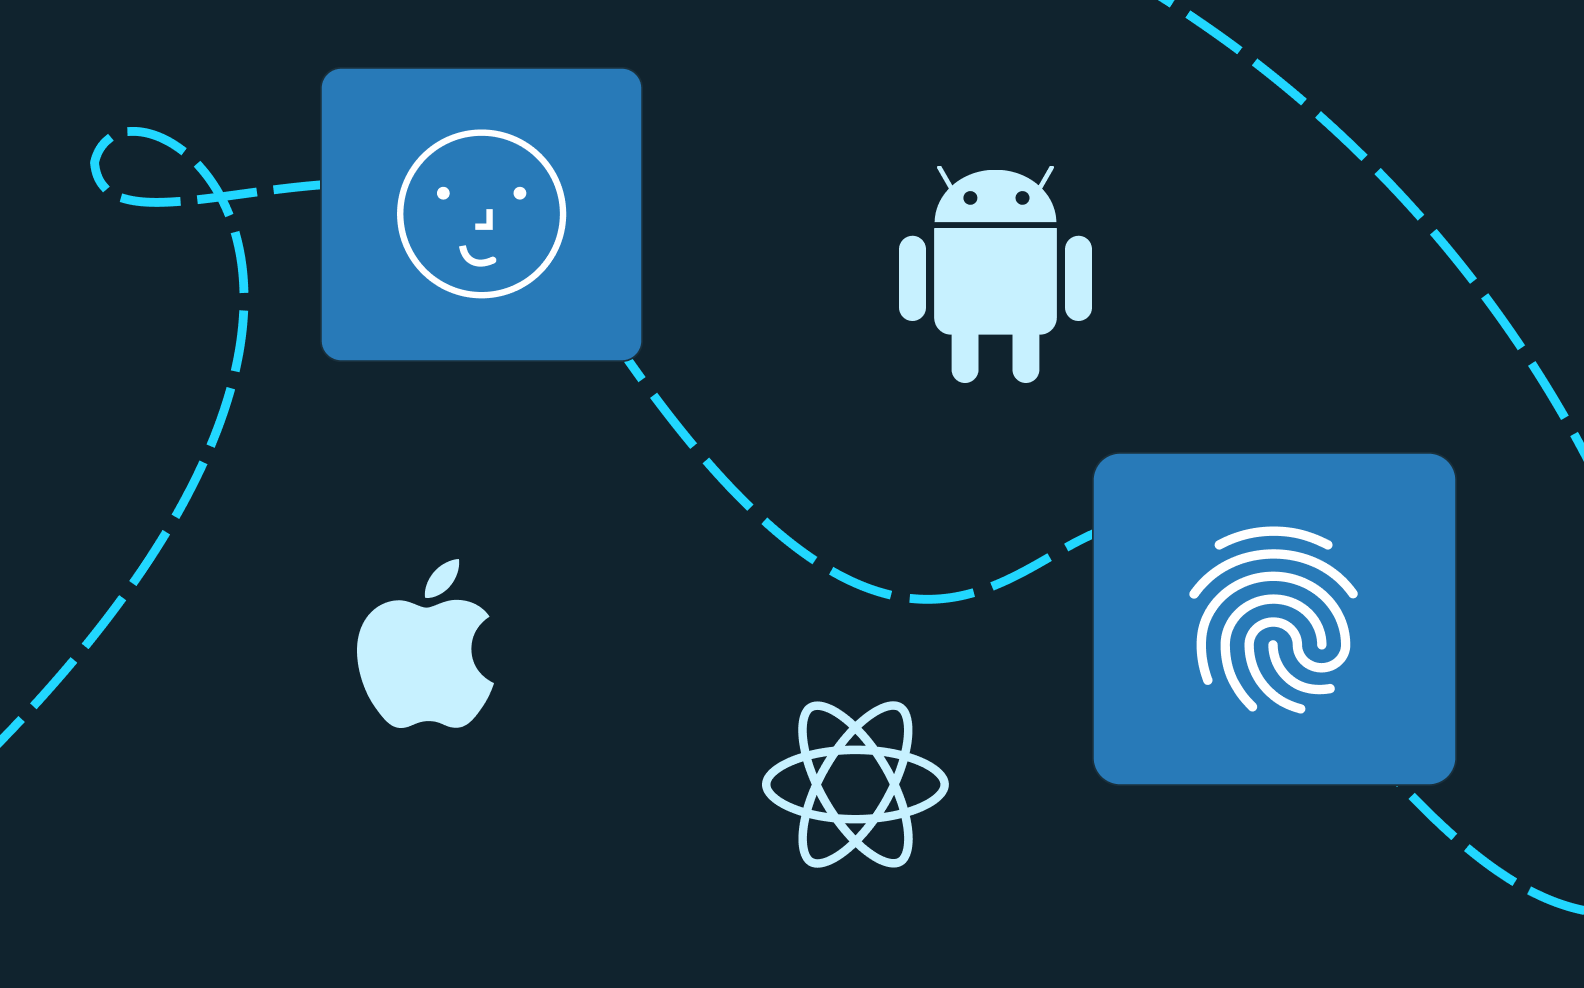 Light blue logos for Android (a robot), Apple (an apple) and React Native (an atom diagram) on a dark blue background, also with a thumbprint icon and a FaceID icon